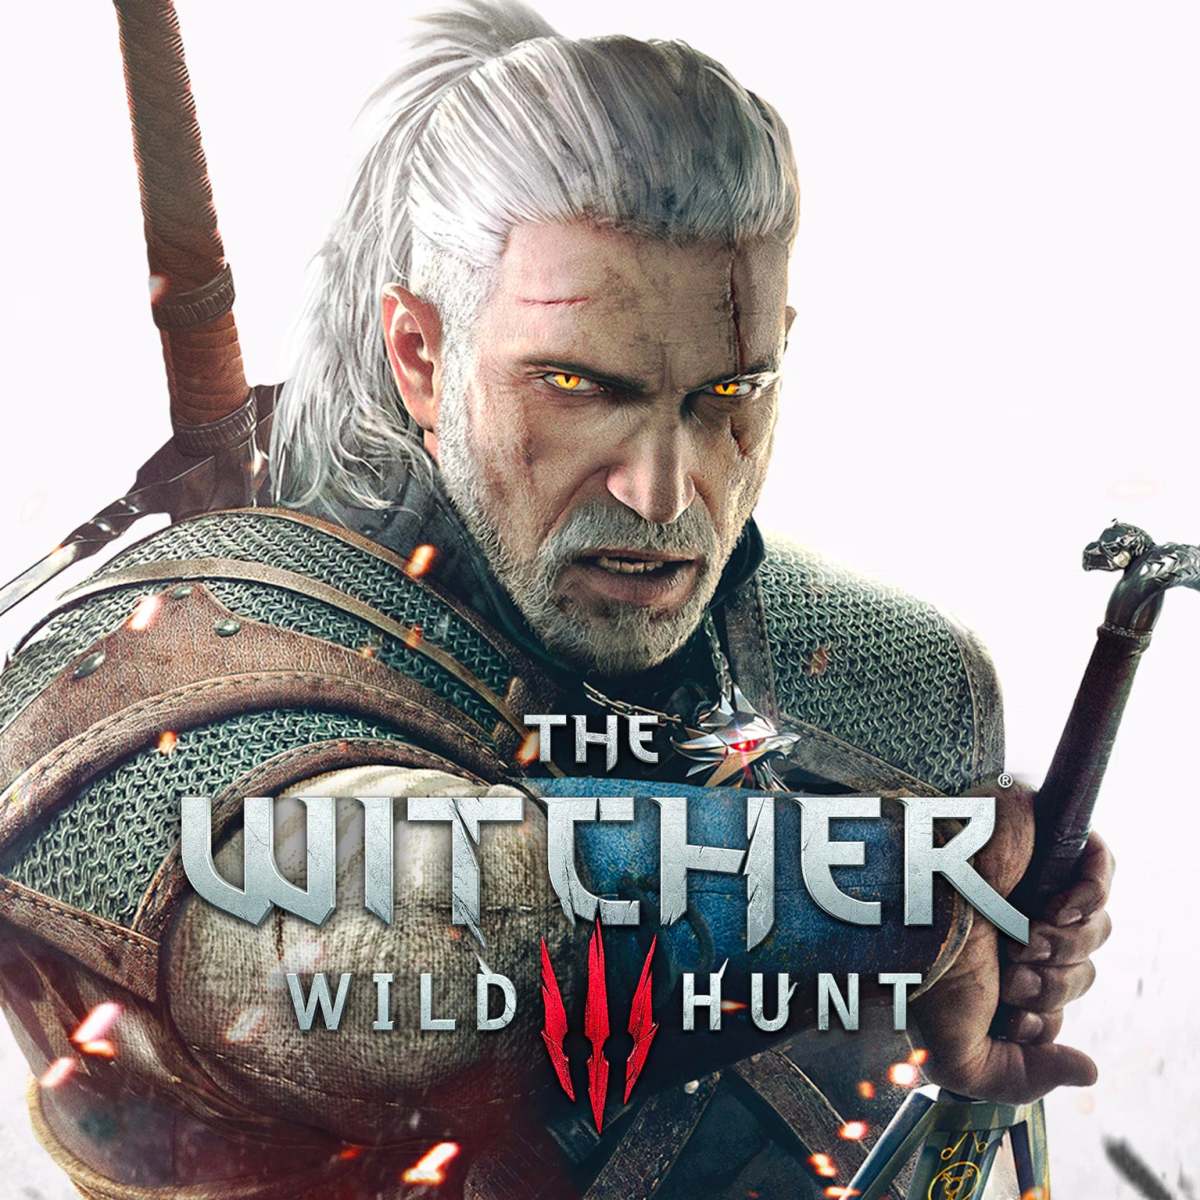 Is The Witcher 3: Wild Hunt Worth It?